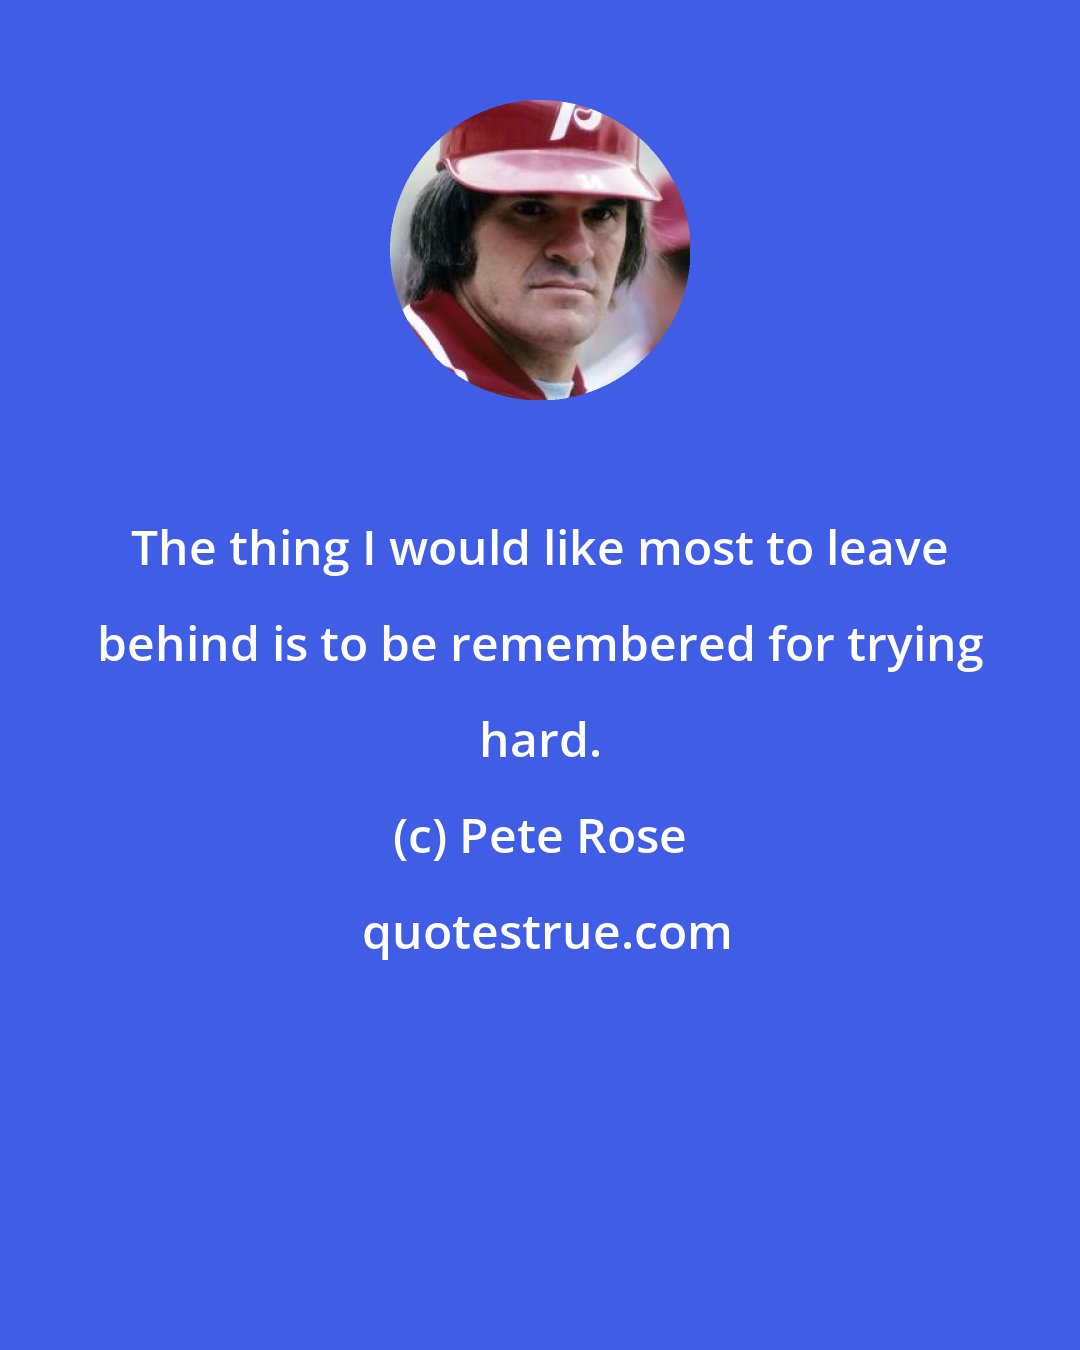 Pete Rose: The thing I would like most to leave behind is to be remembered for trying hard.